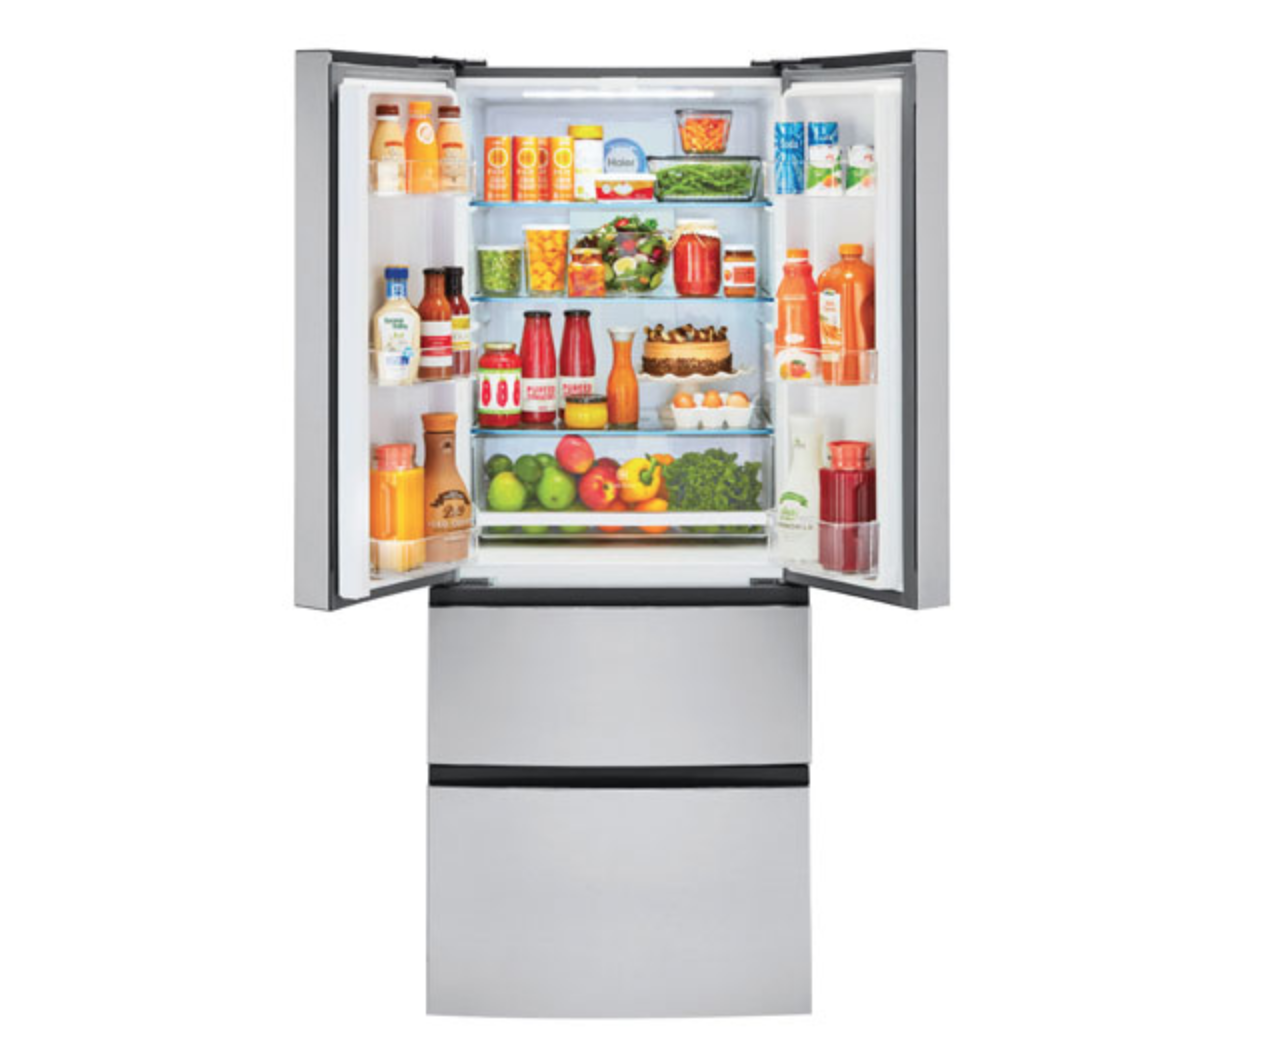 image of a Haier French door refrigerator, open to show storage space